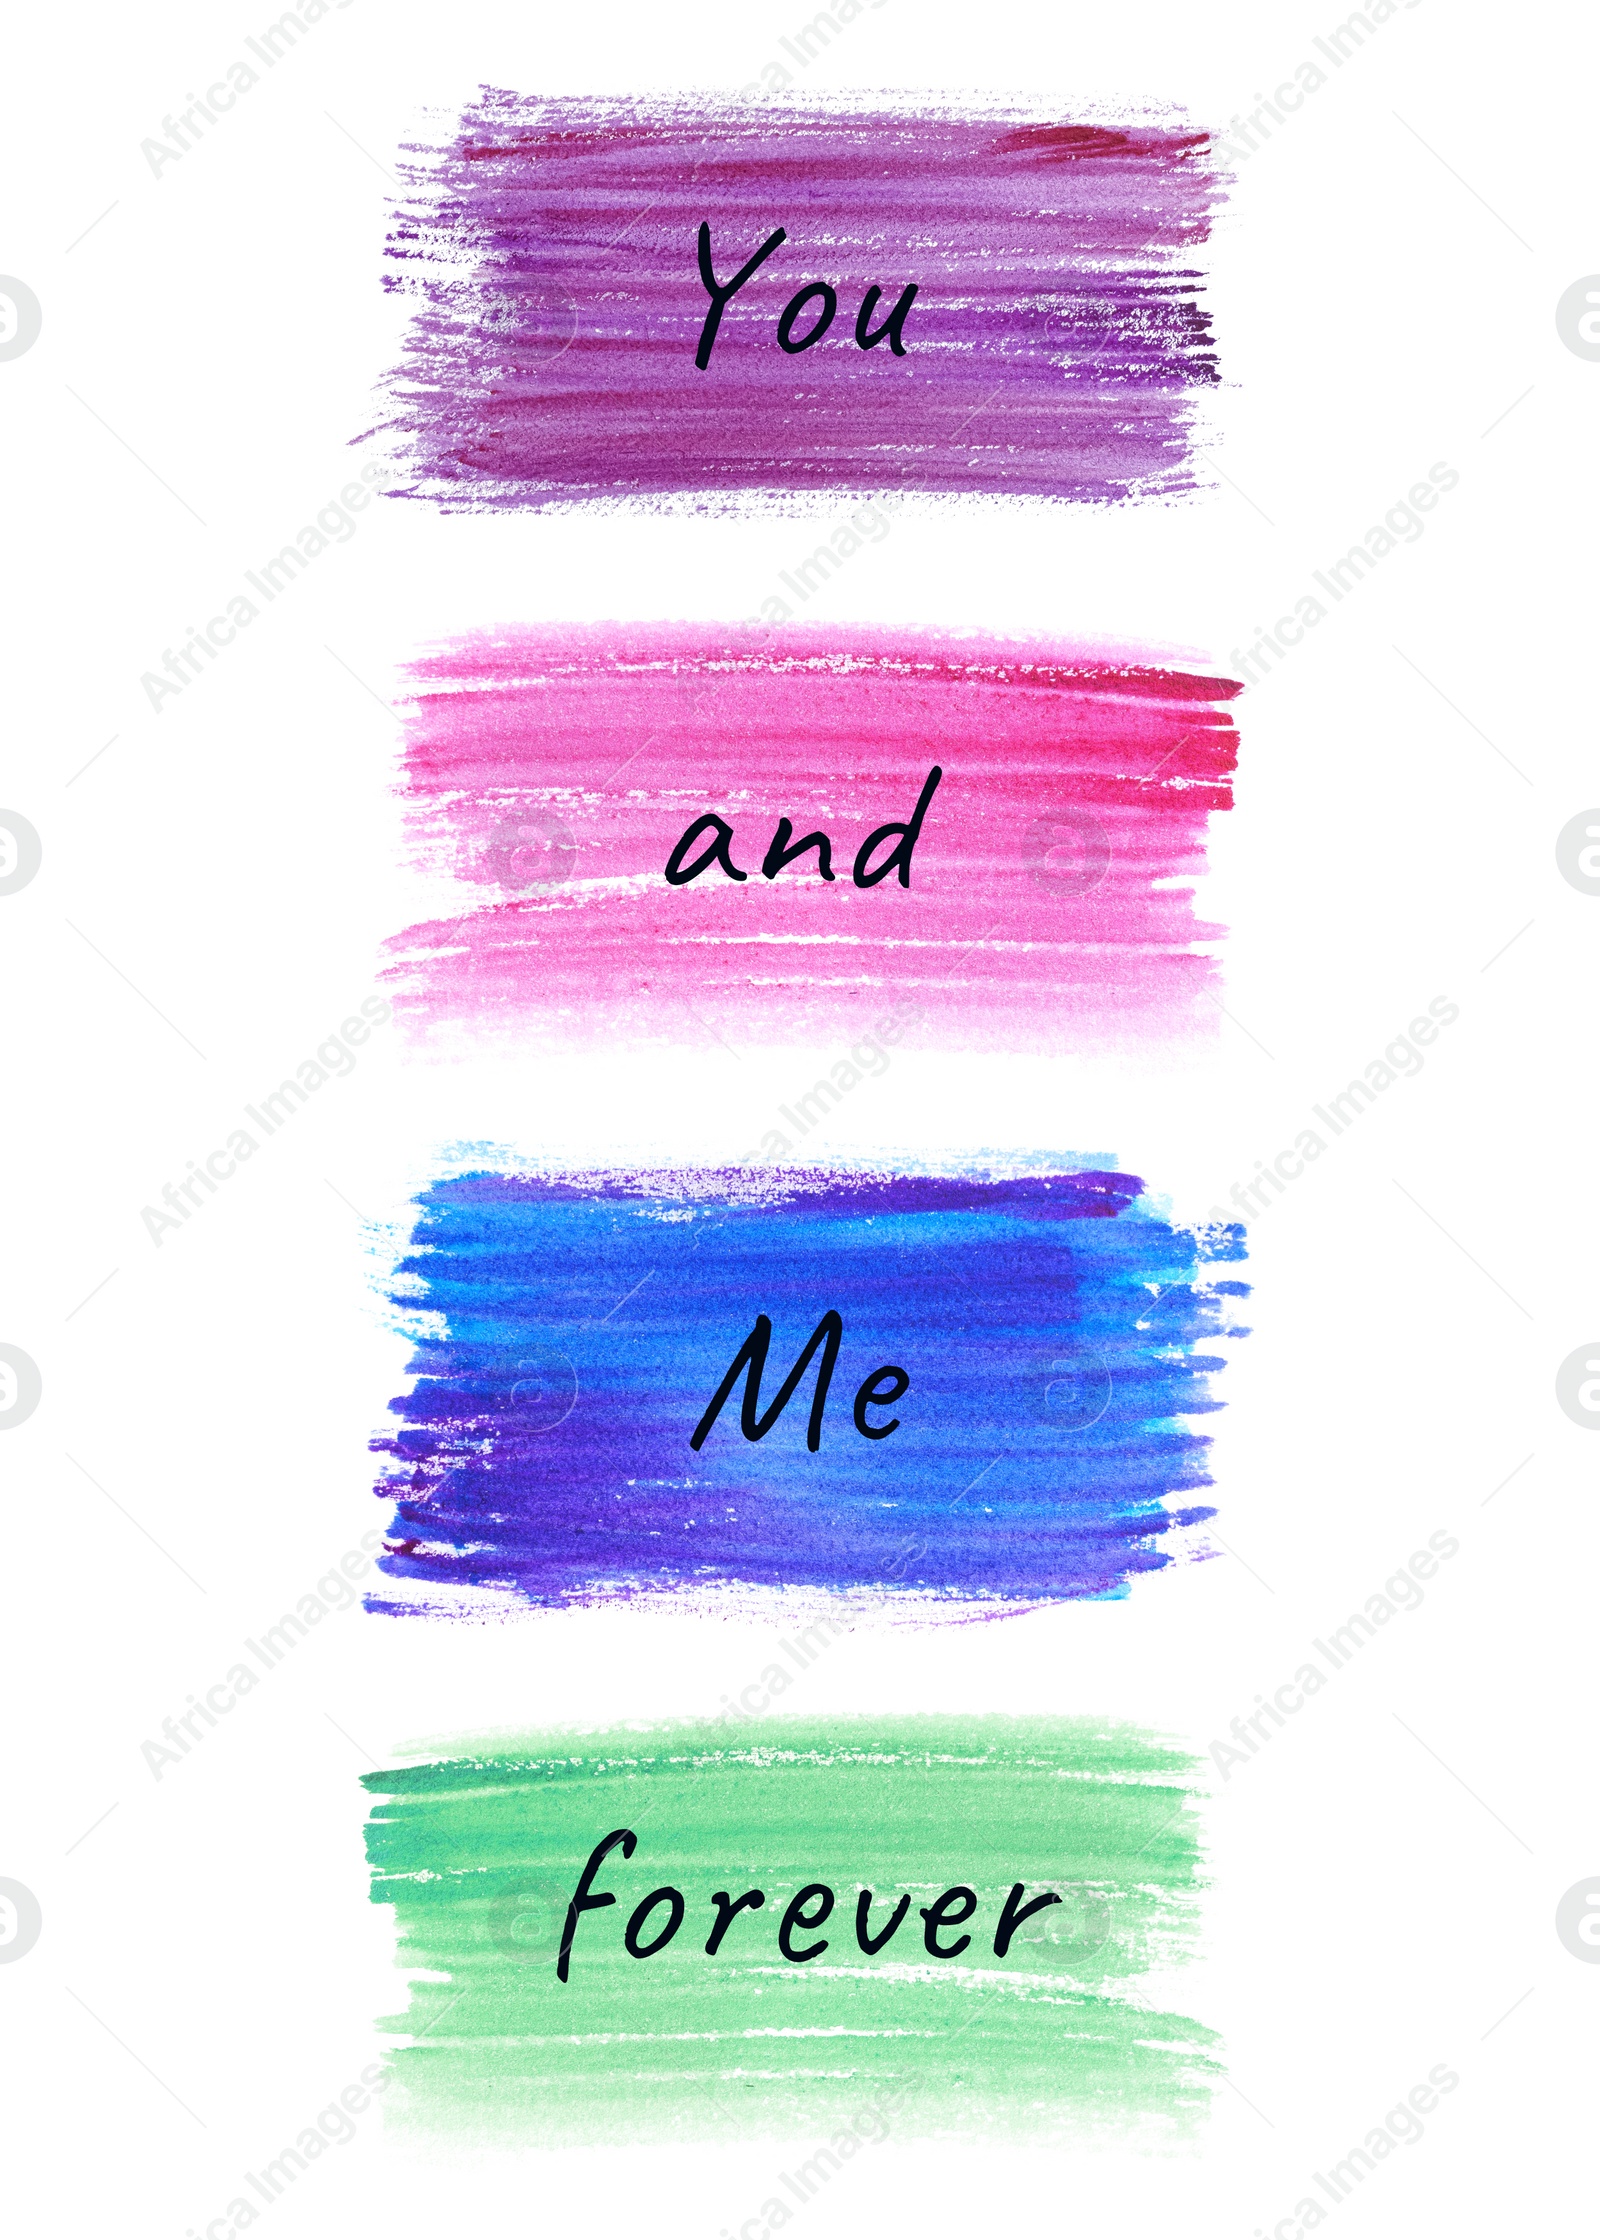 Image of Inspirational vibes. Words in different paint strokes combined into phrase you and me forever on white background